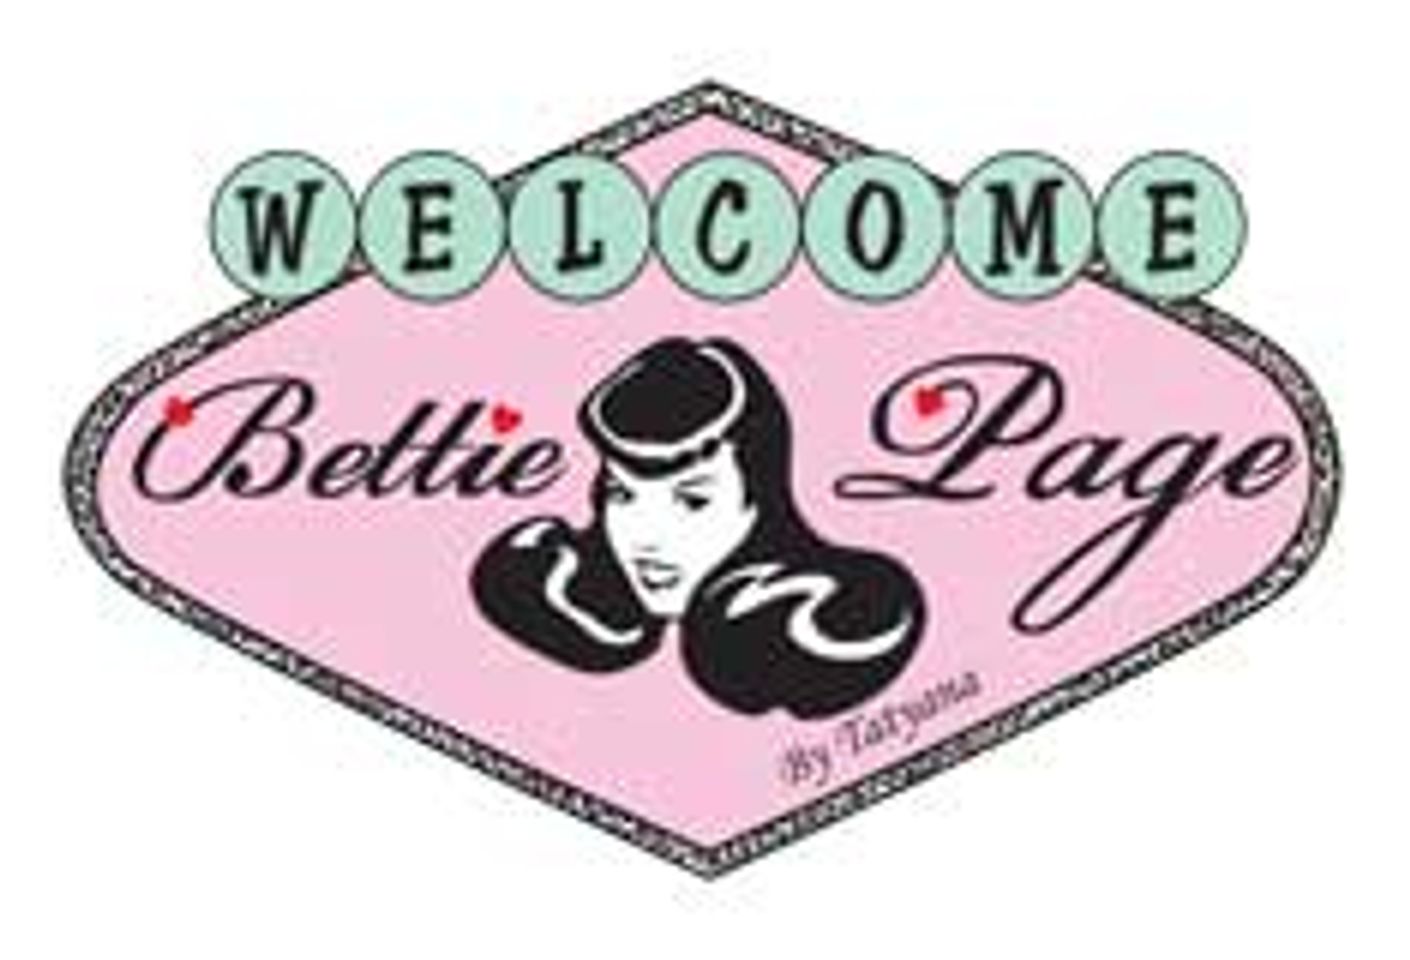 Bettie Page Clothing Takes Rapidly Expanding Company Public